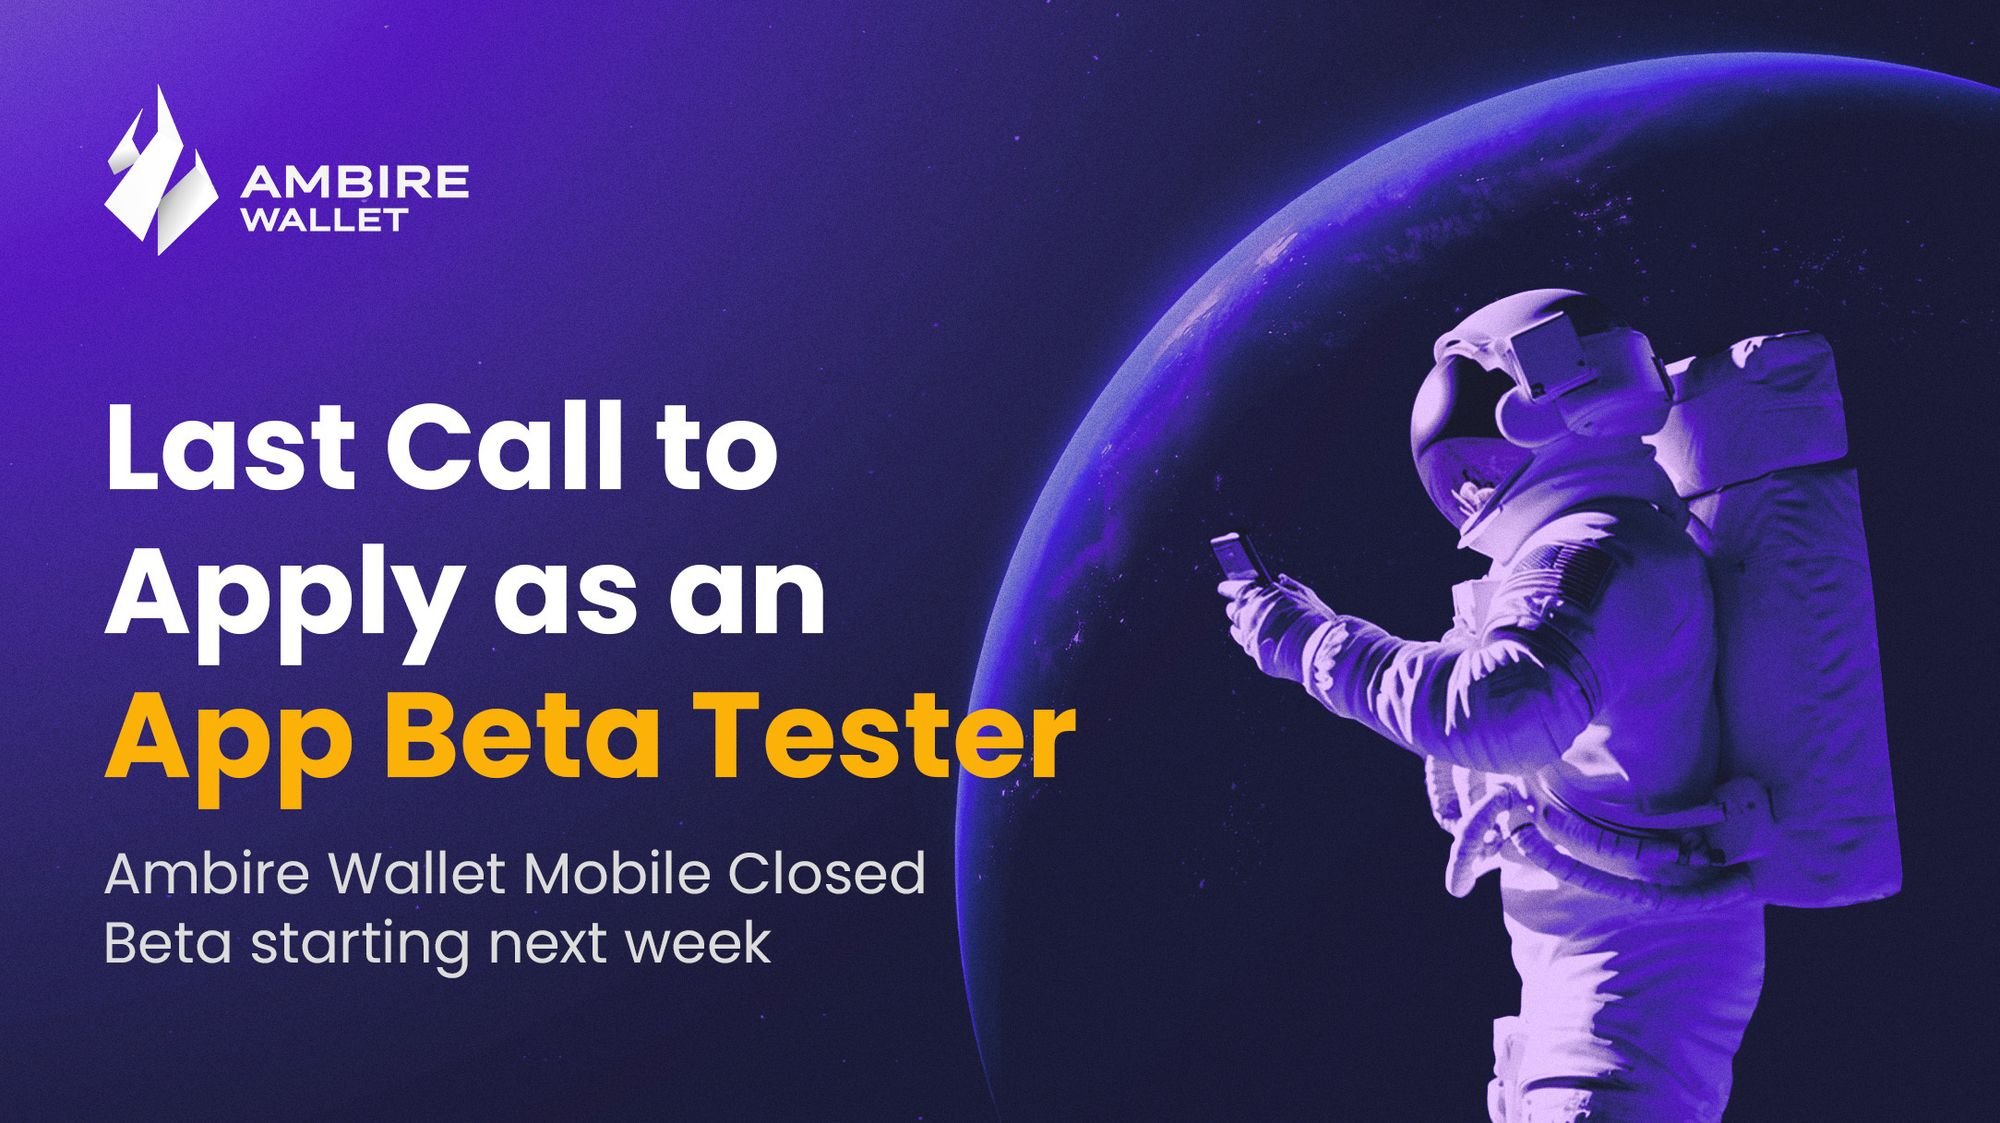 Last Call to Apply as an App Beta Tester